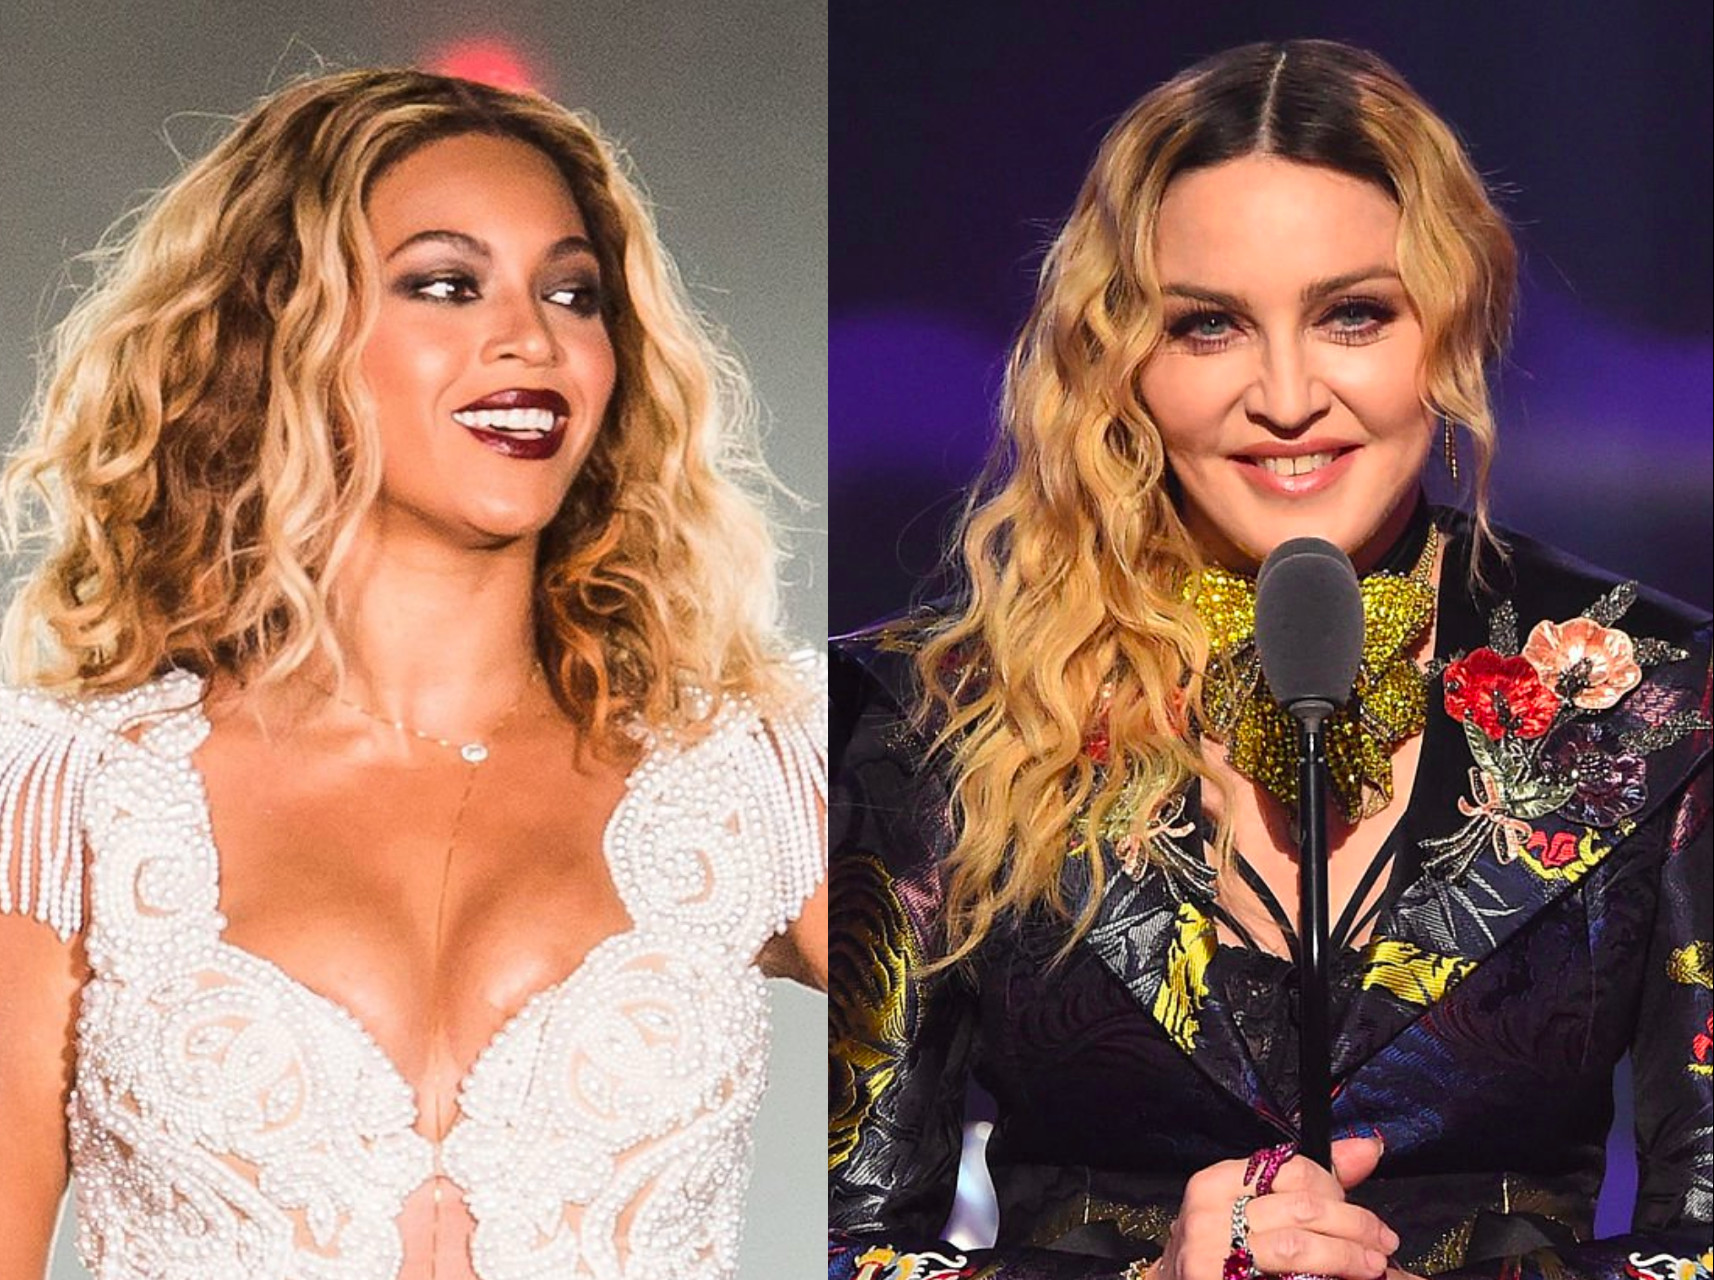 Beyoncé Literally Gives Madonna Her Roses: “You Are A Masterpiece Genius”